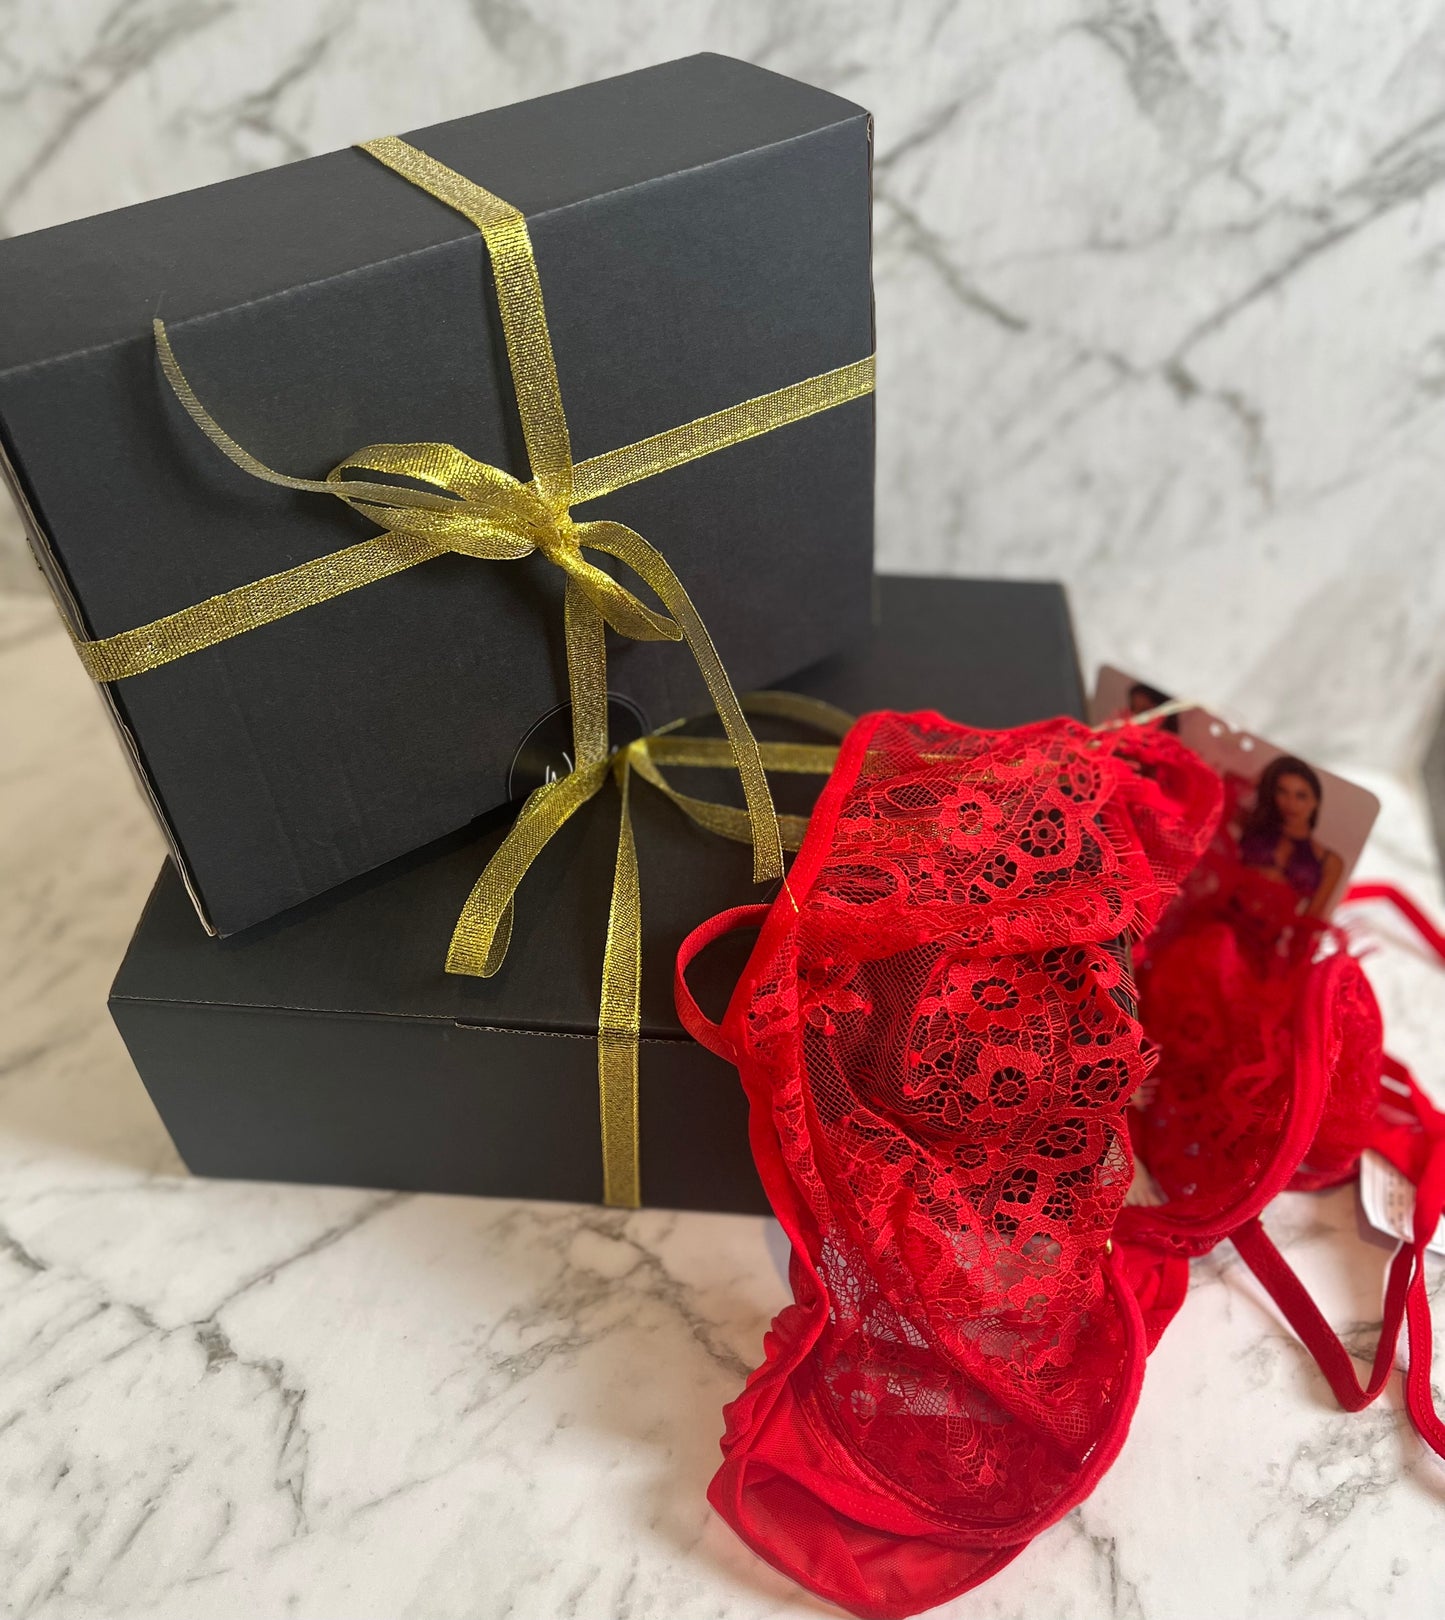 Premium Limited Edition Lingerie Gift Box